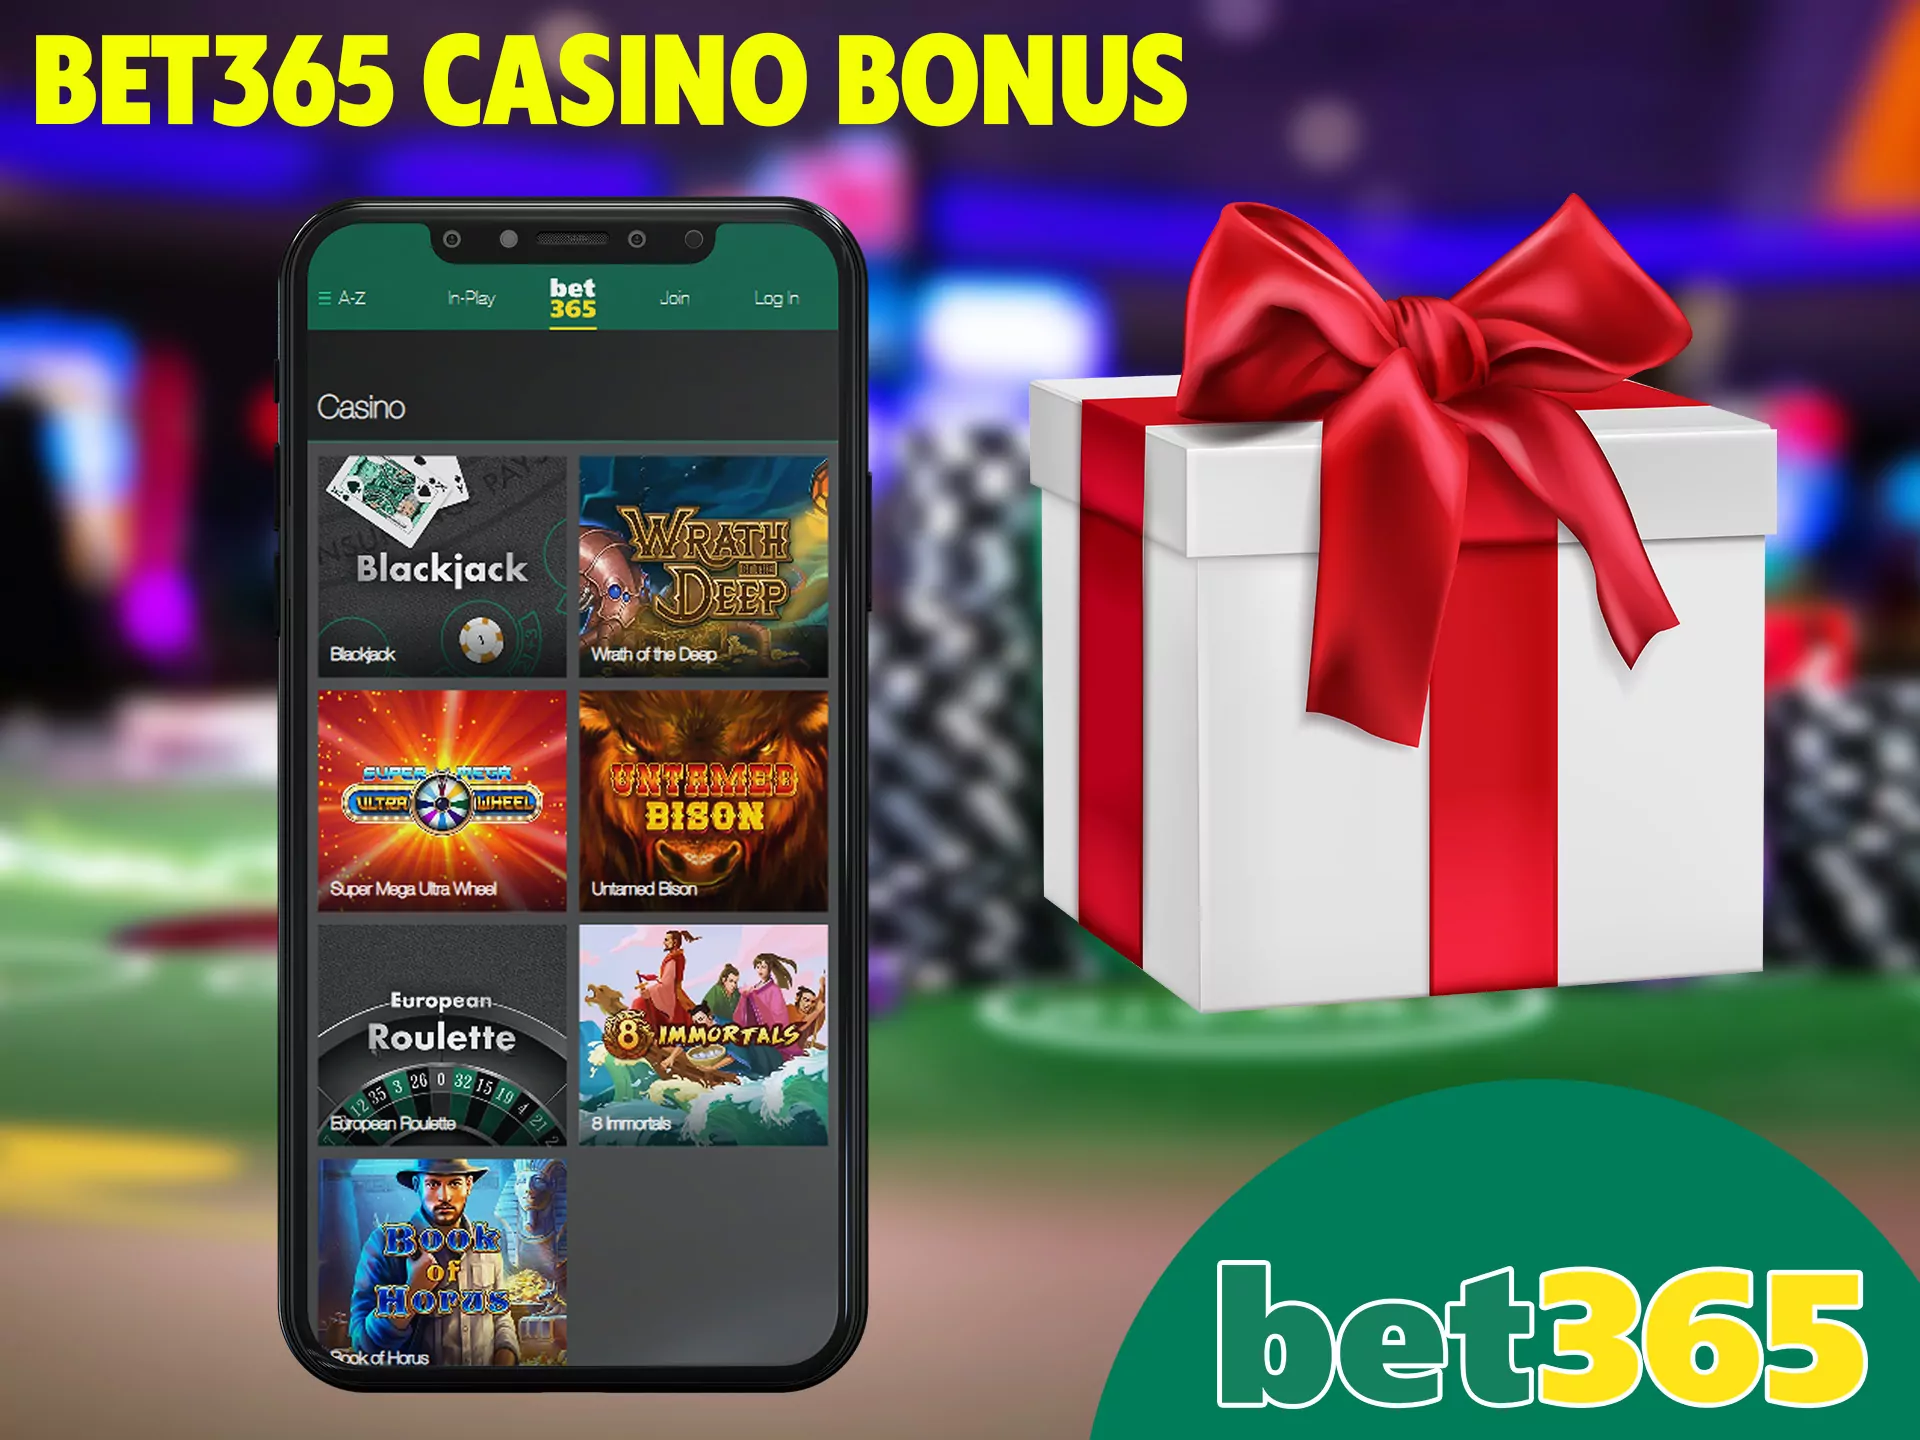 Don't forget to claim your casino bonus for better gambling.